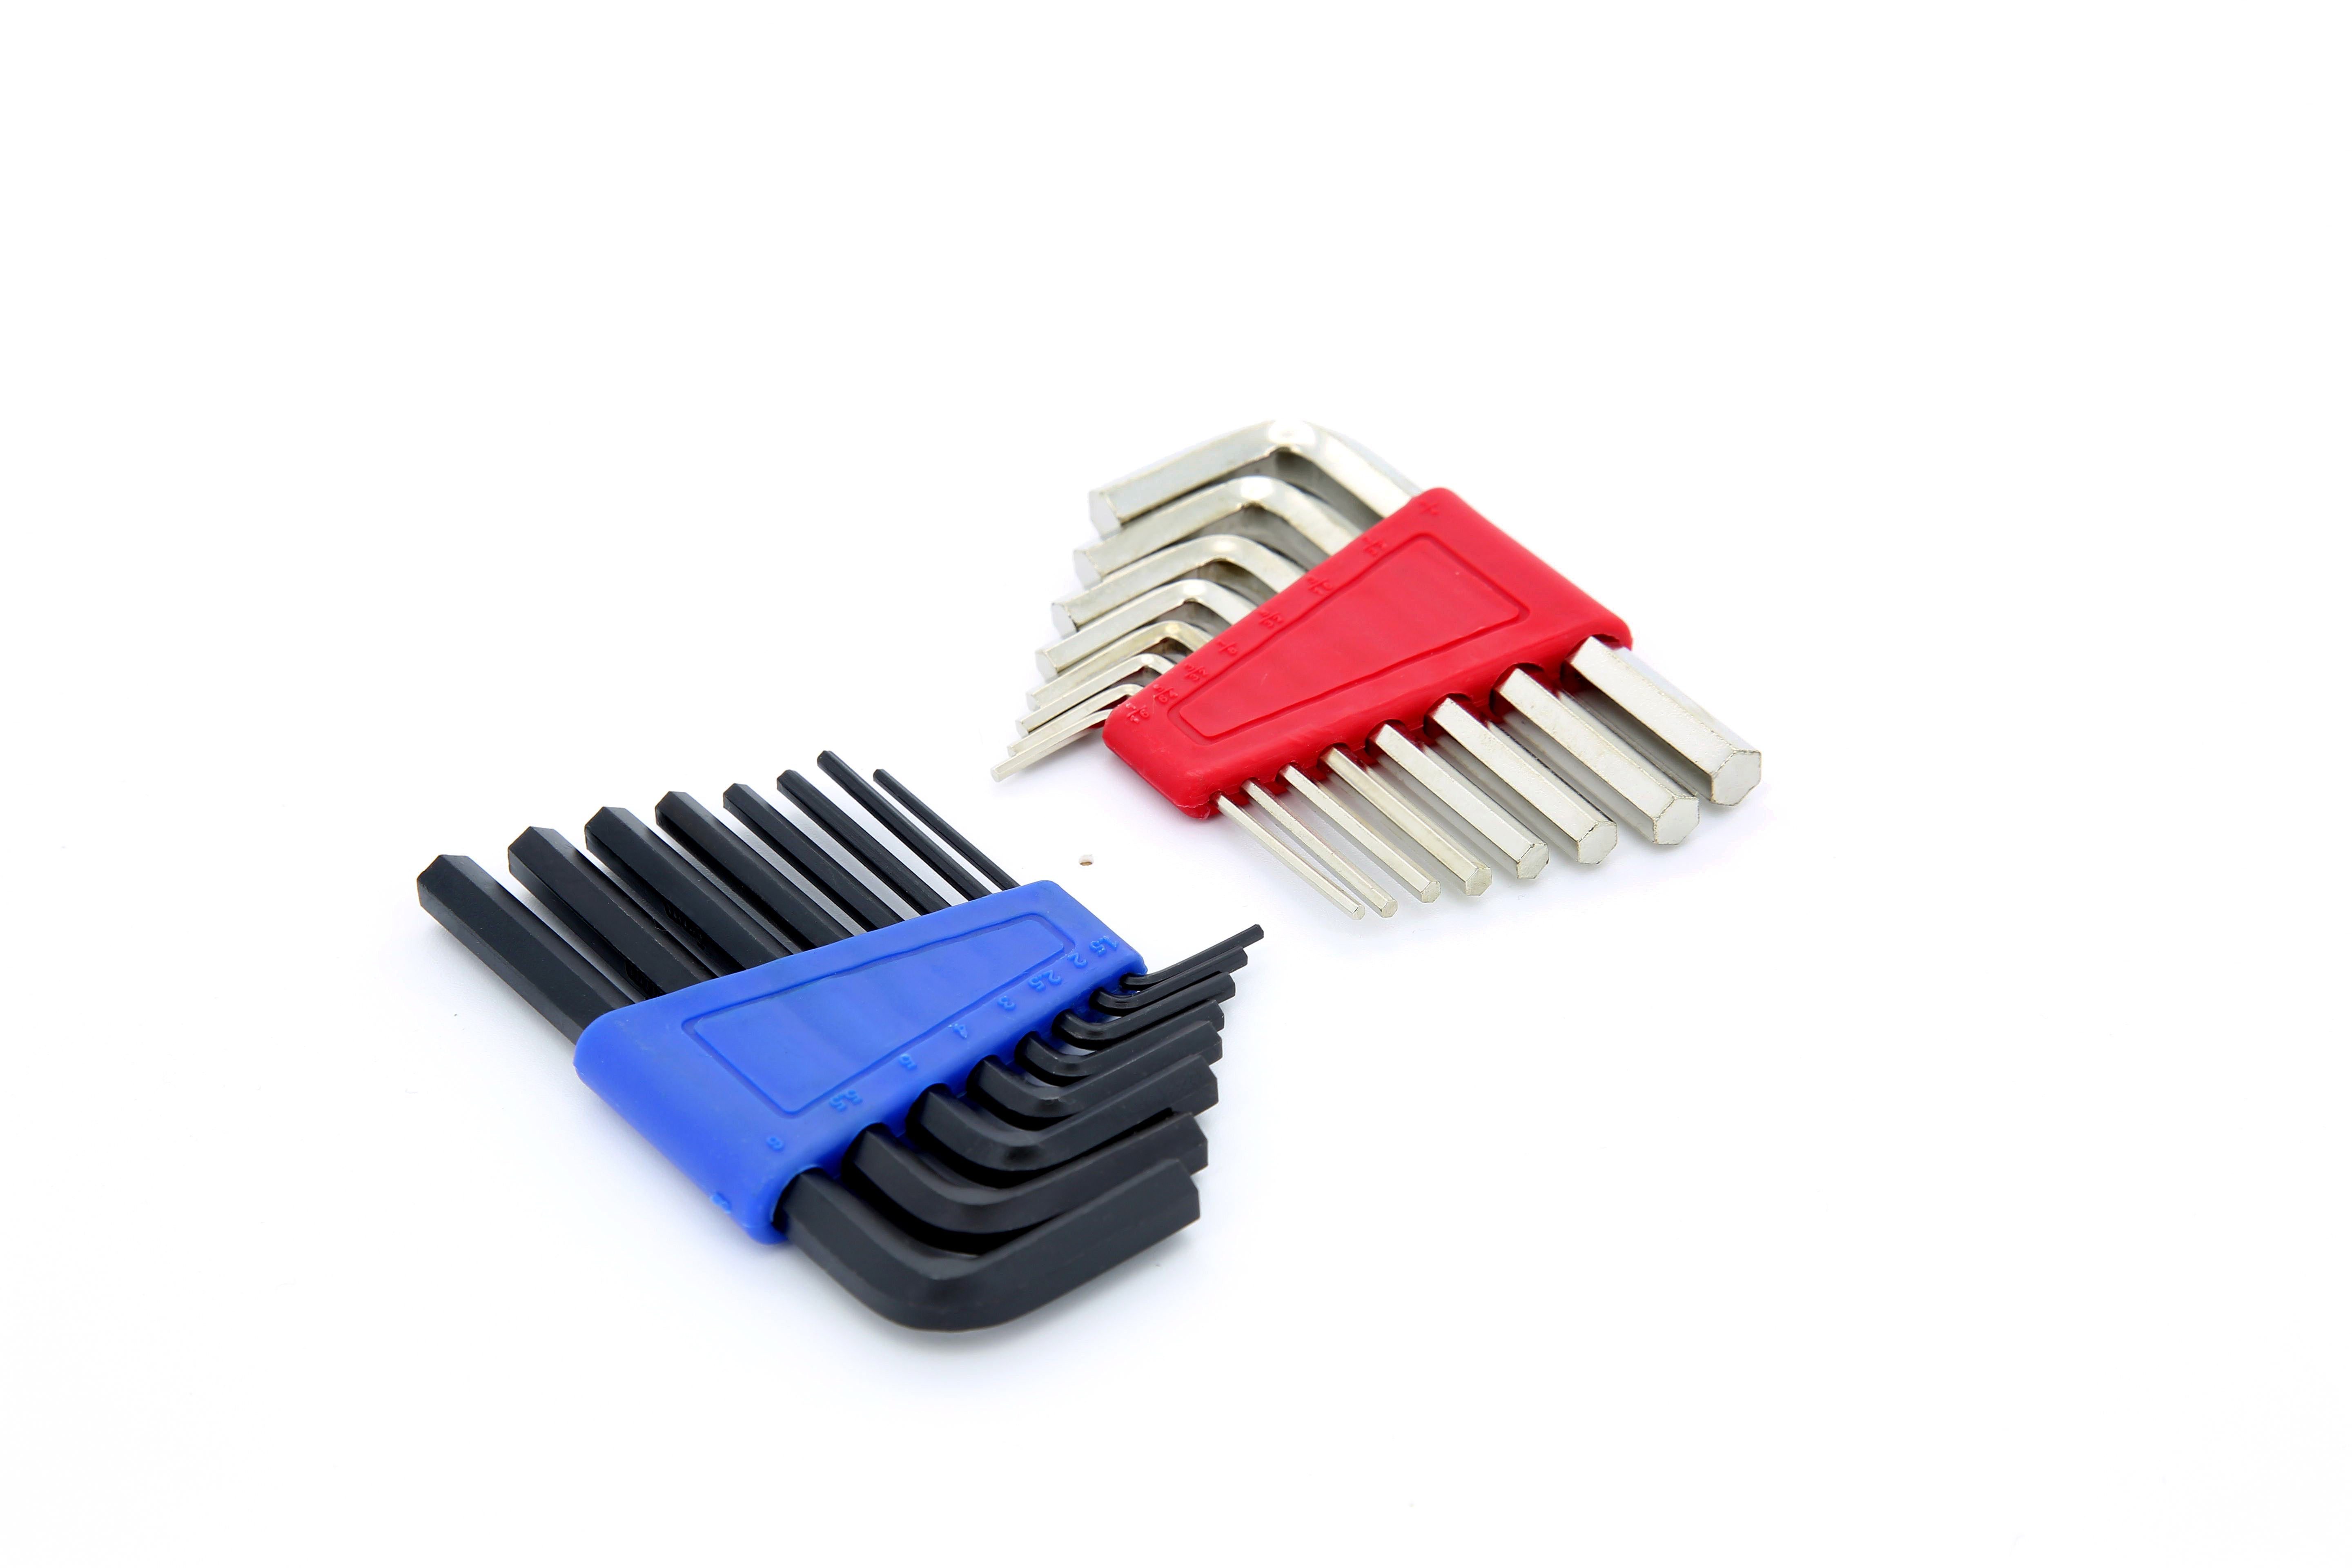 HyperTough 16 Piece Hex Key Set with 8 SAE and 8 Metric Sizes